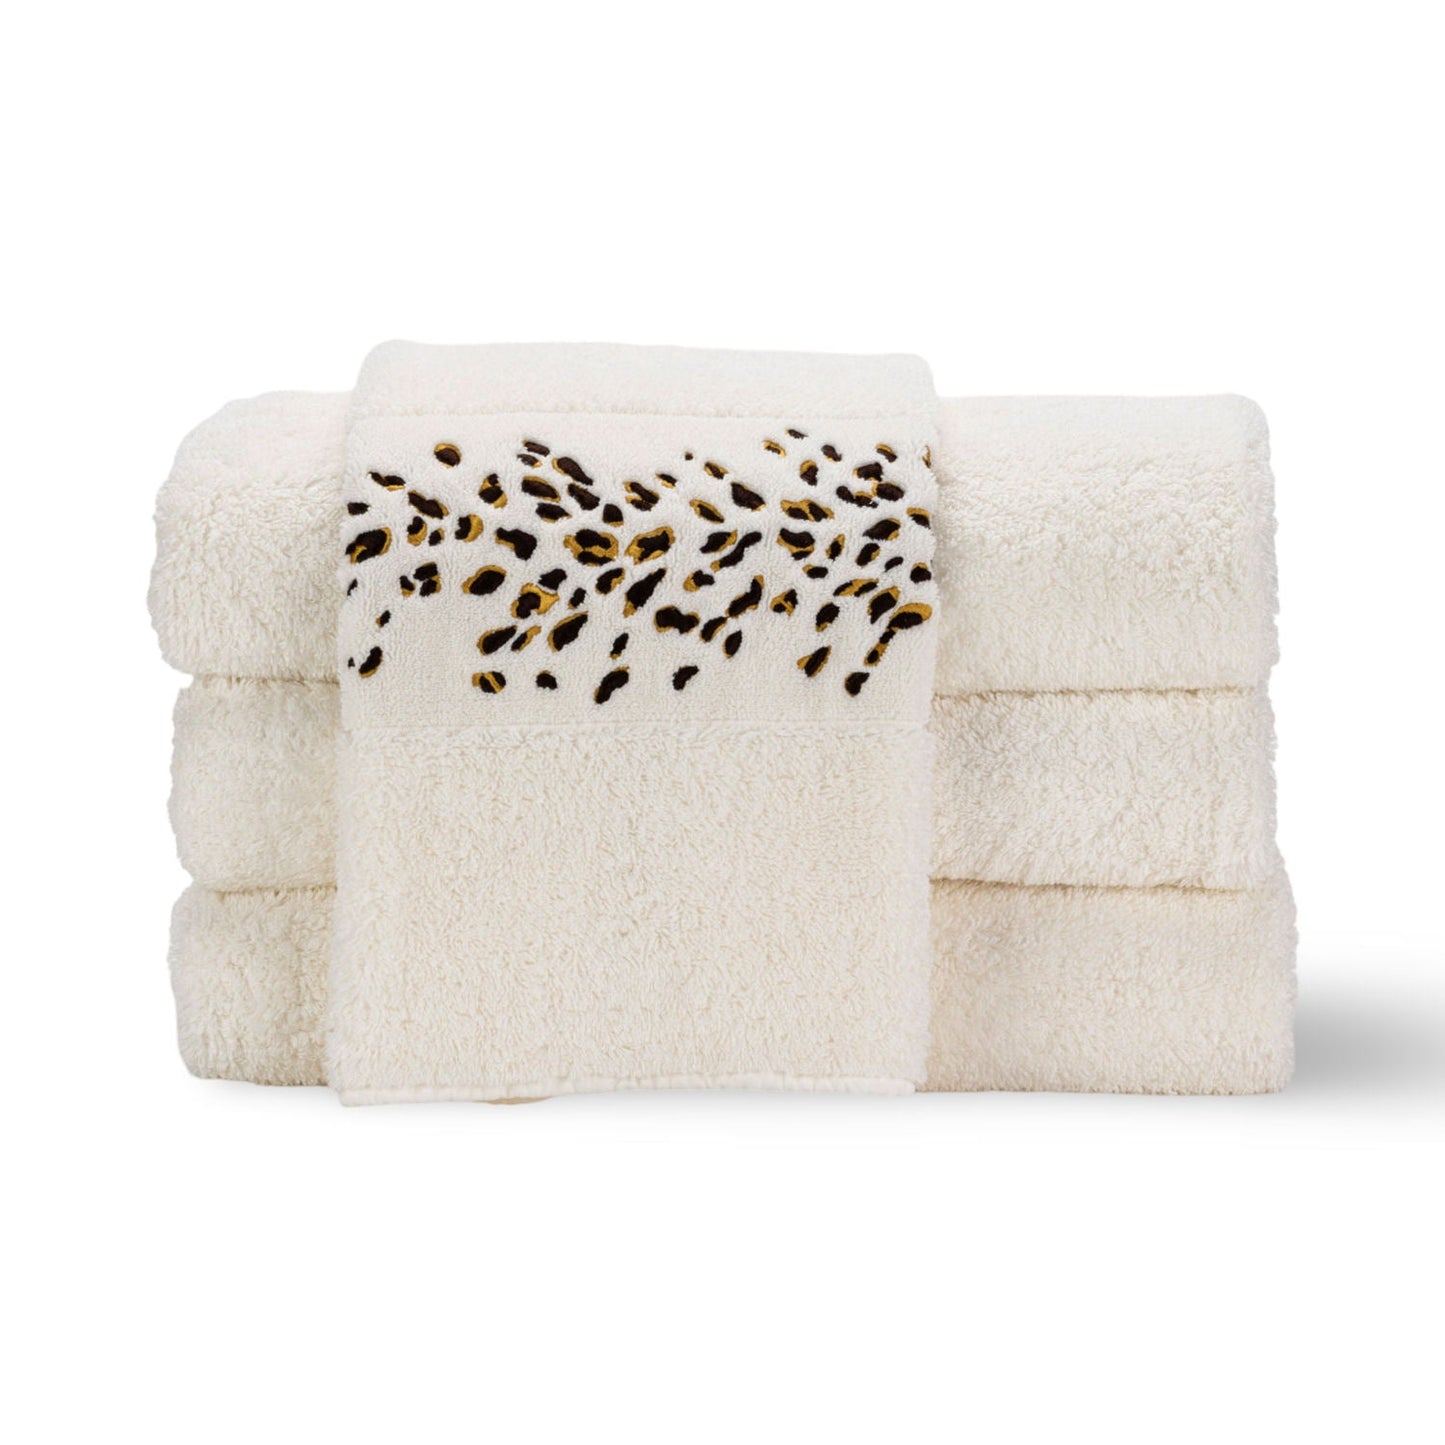 Abyss & Habidecor 100% Giza Egyptian Cotton Towels BENGALE - |VESIMI Design| Luxury Bathrooms and Home Decor